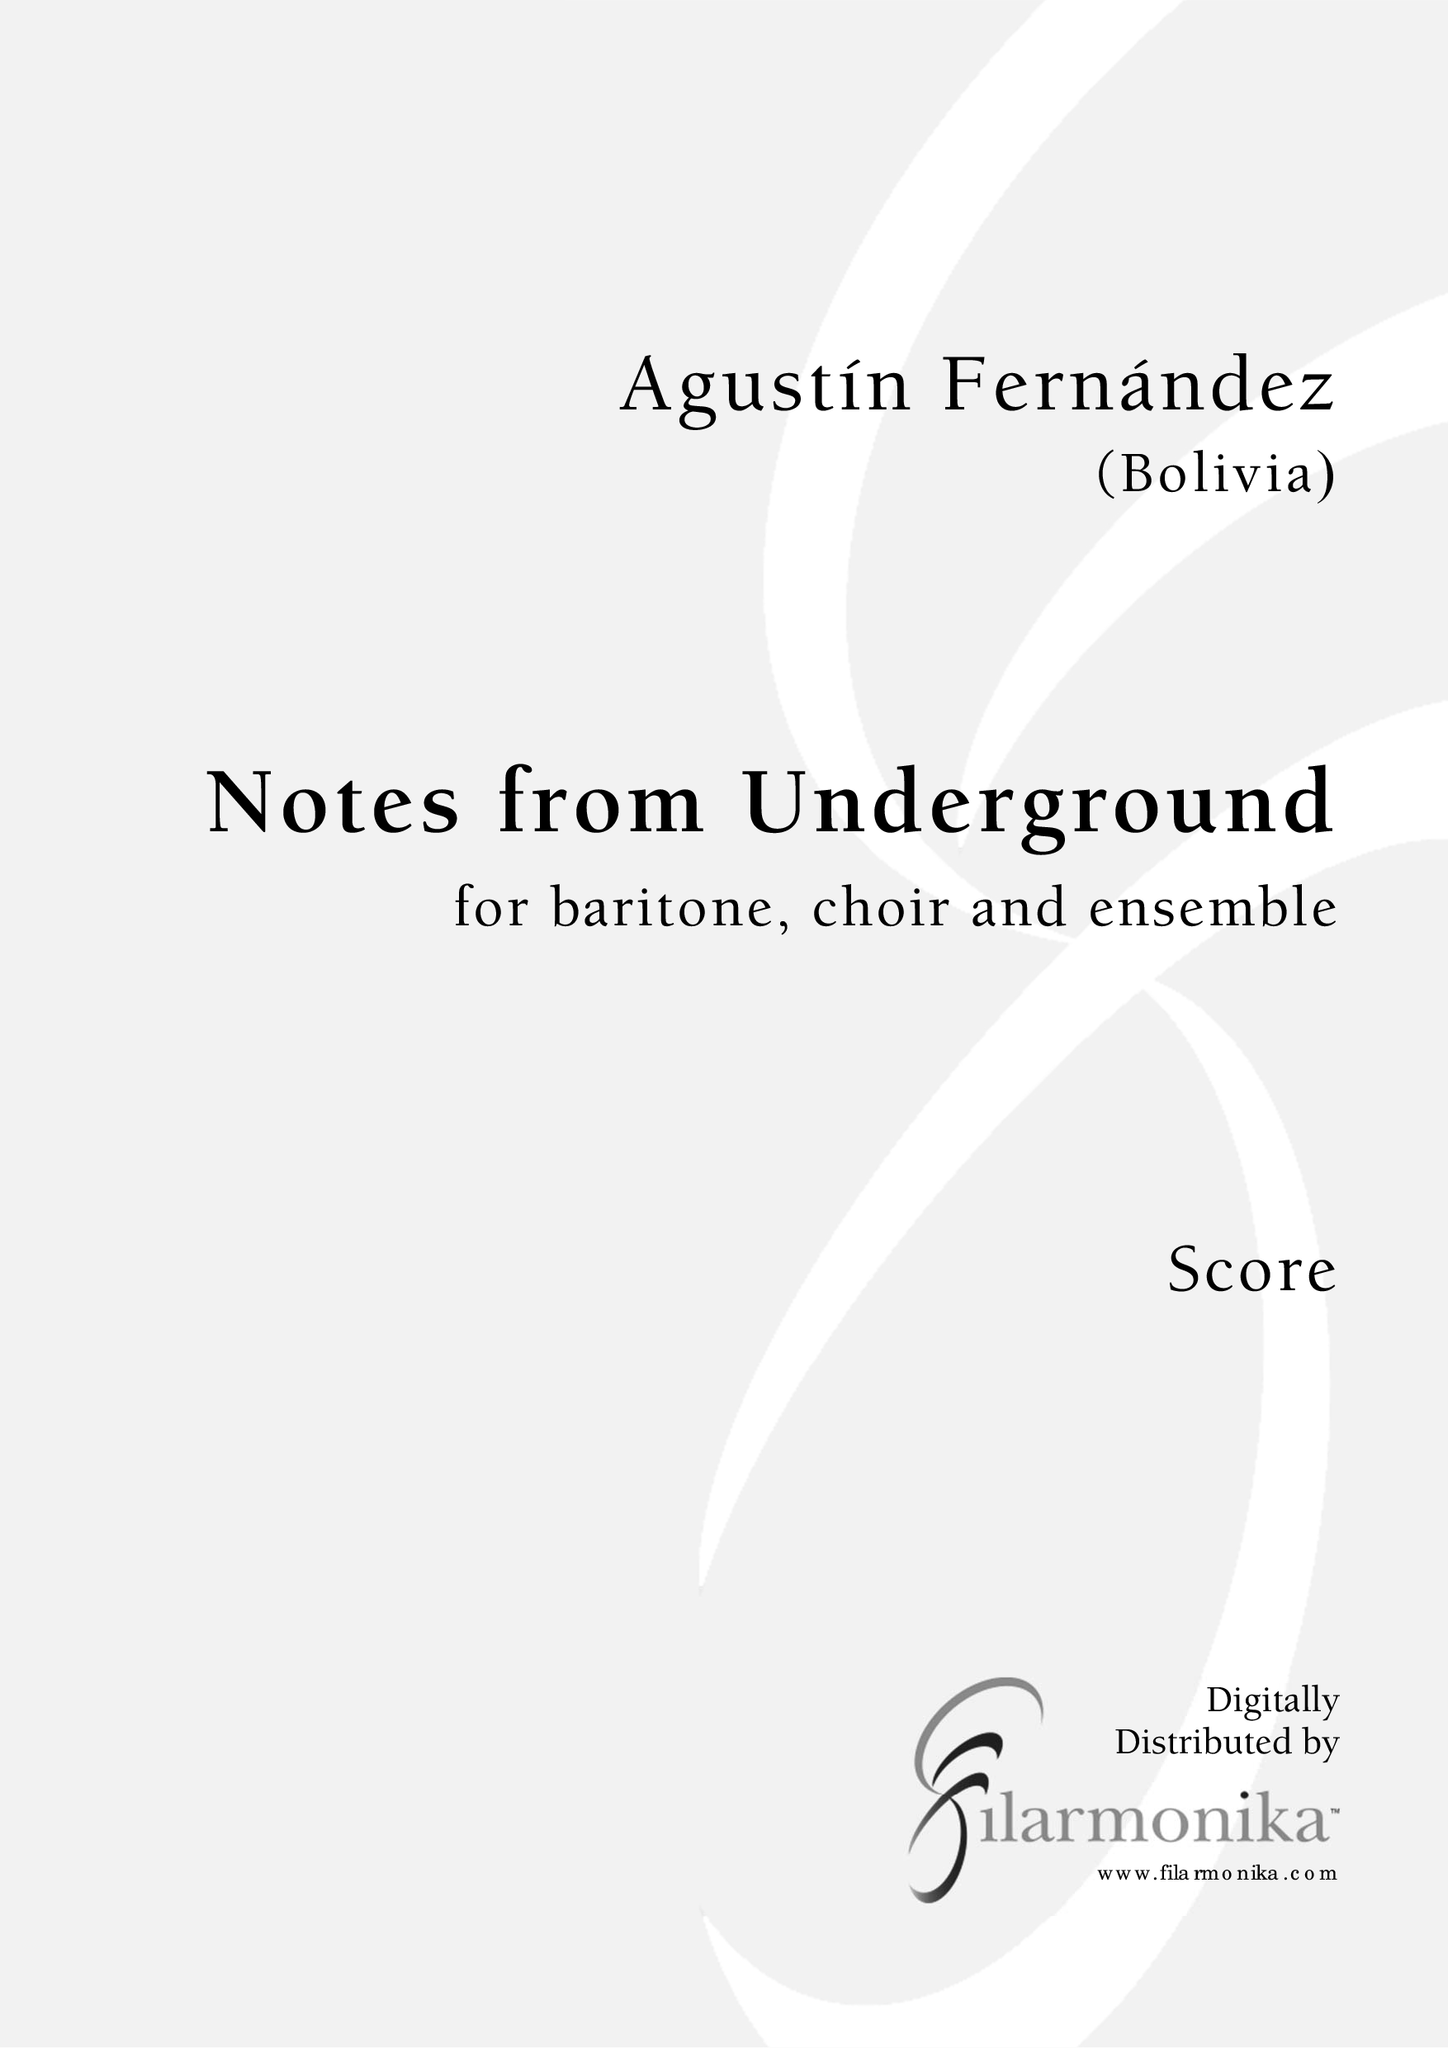 Notes from Underground, for baritone, choir, and ensemble